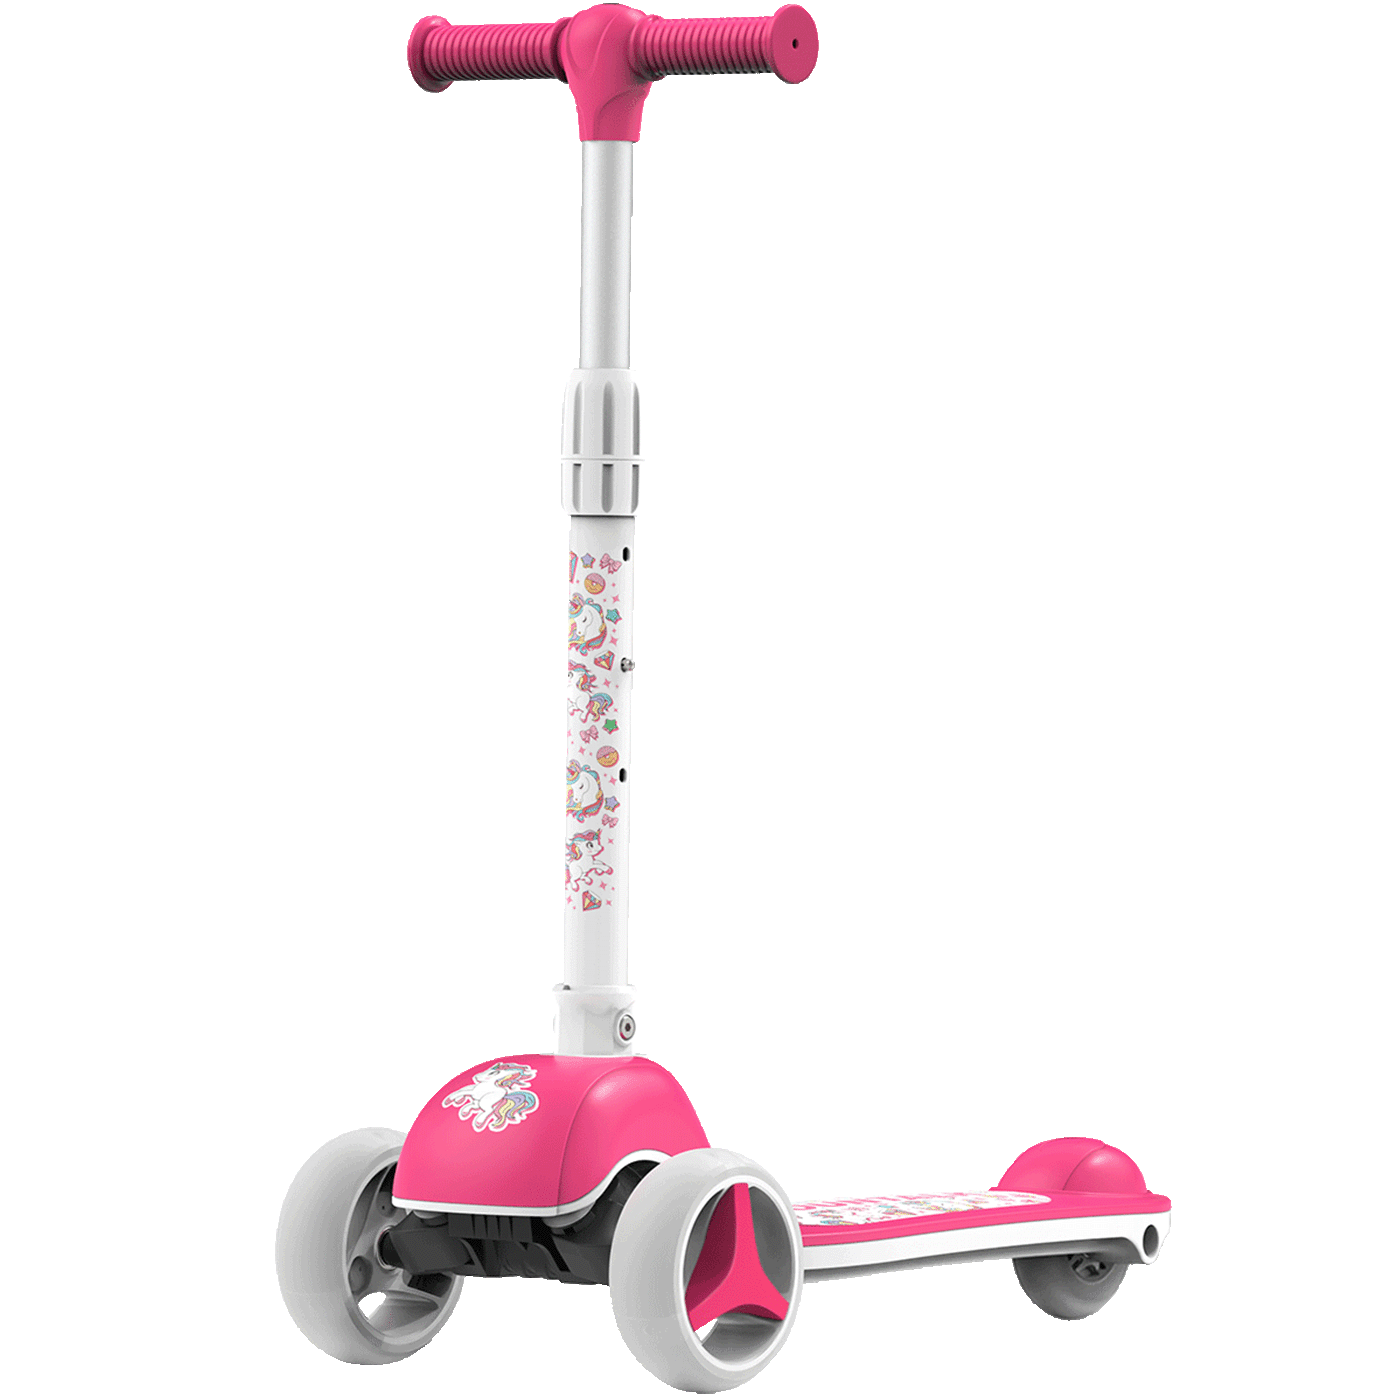 3 Wheels Foldable Kids Scooter with Adjustable Heights and LED Wheel, Unicorn, Rose Pink